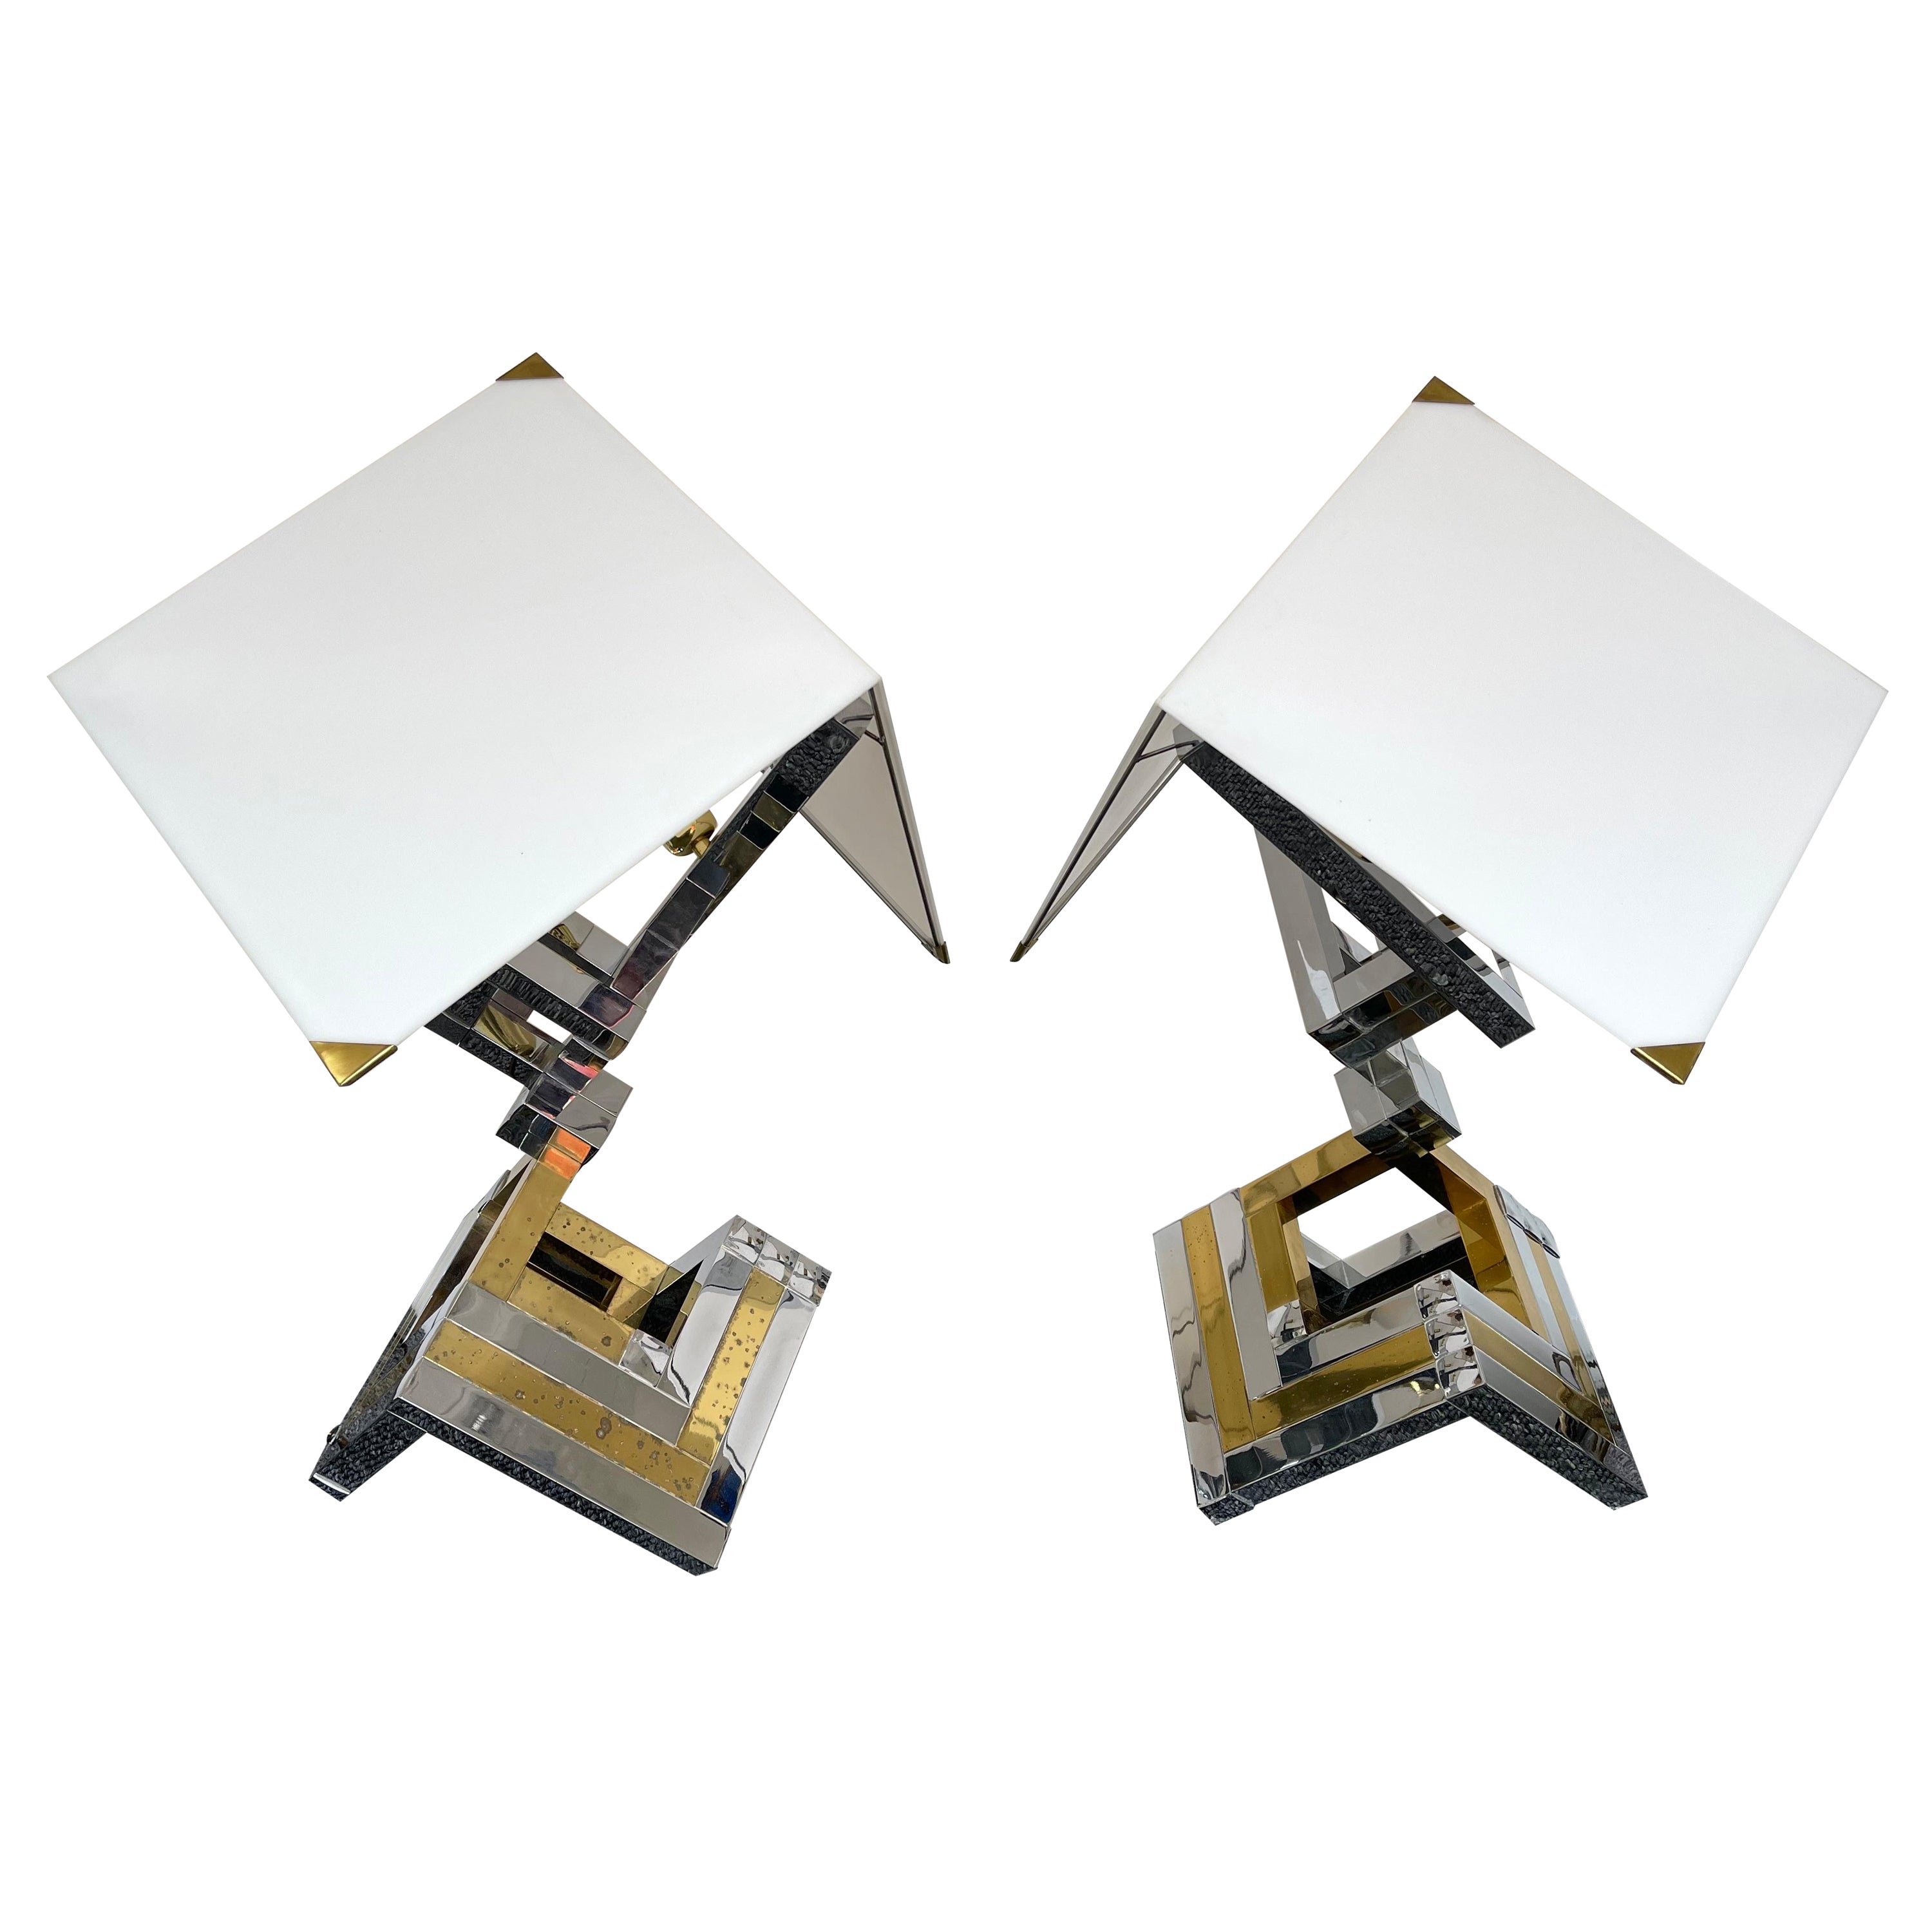 Pair of Brass and Metal Chrome Lamps by Lumica, Spain, 1970s For Sale